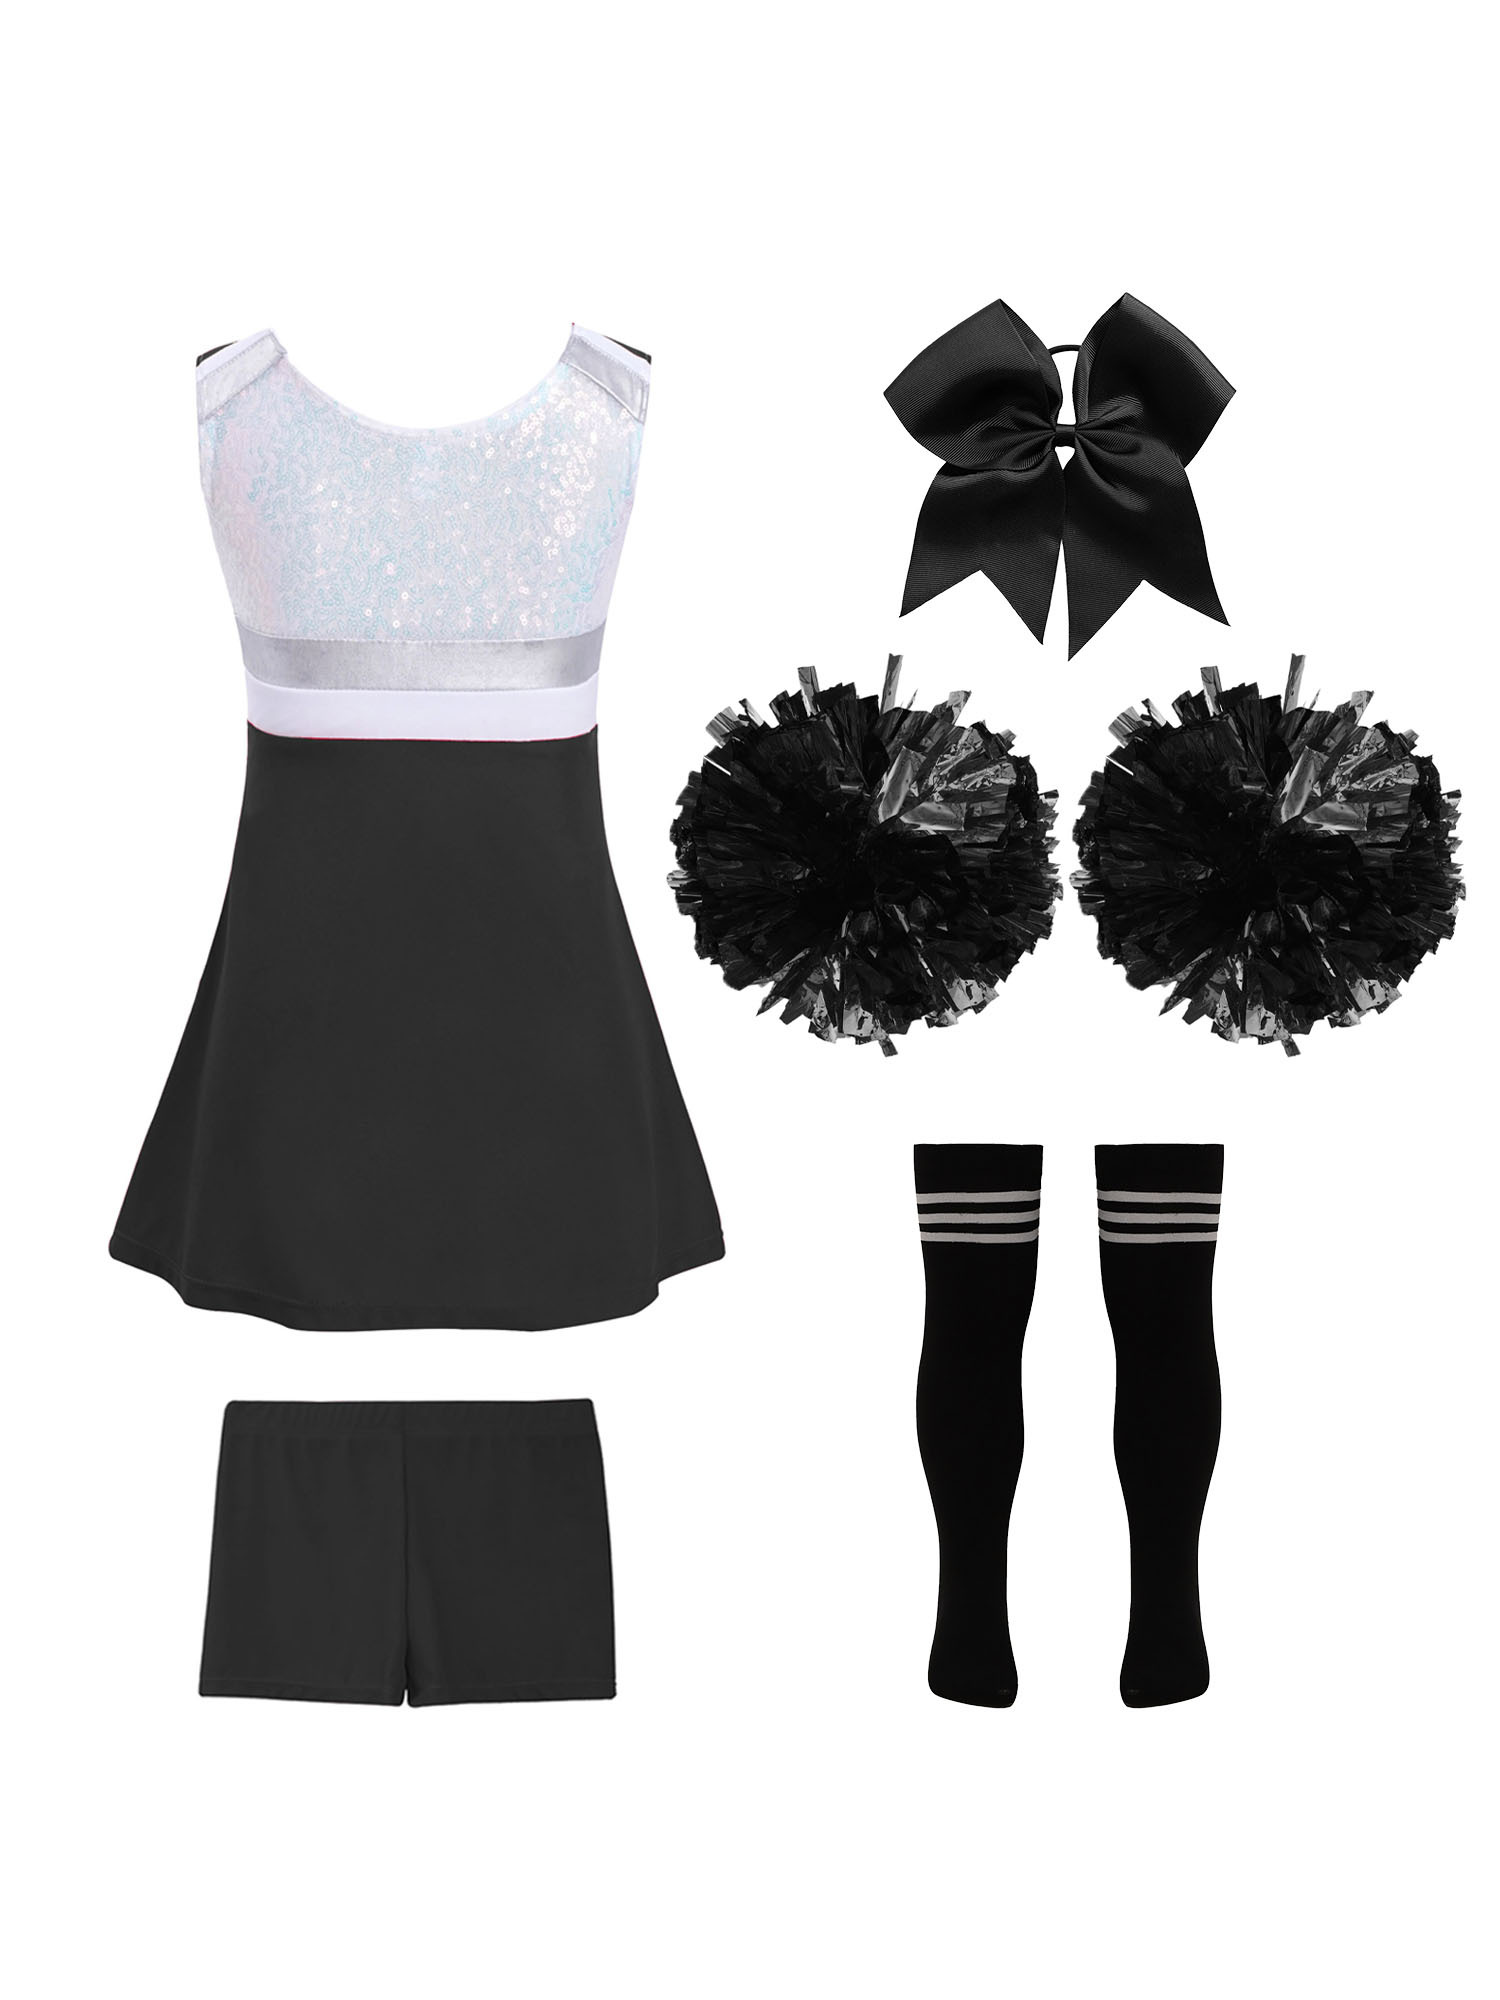 TiaoBug Kids Girls Cheer Leader Uniform Sports Games Cheerleading Dance Outfits Halloween Carnival Fancy Dress Up A Black&White 14 - image 2 of 5